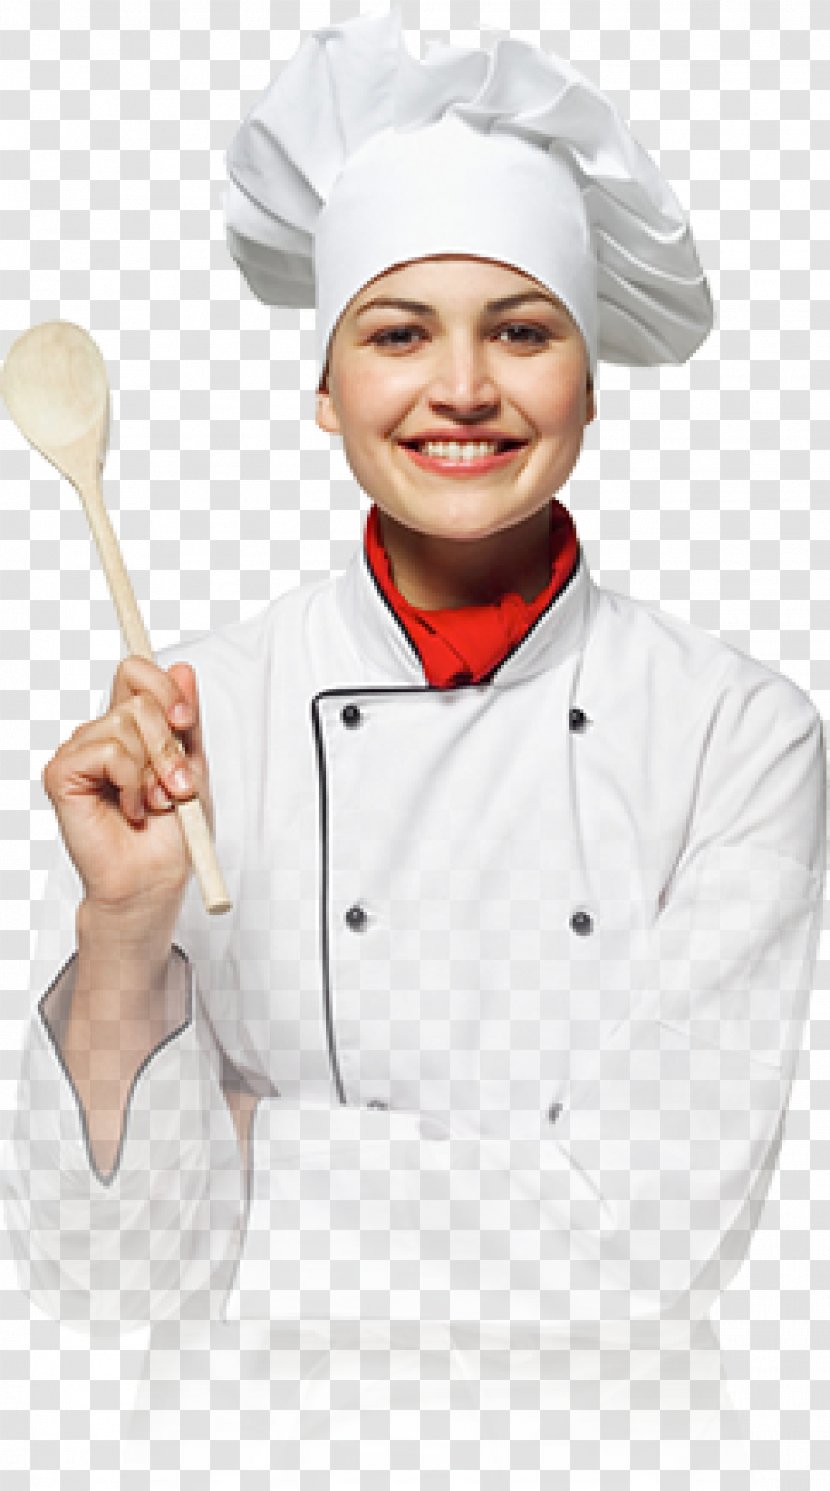 Indian Cuisine Pho Mexican Take-out Restaurant - Celebrity Chef - Cooking Transparent PNG